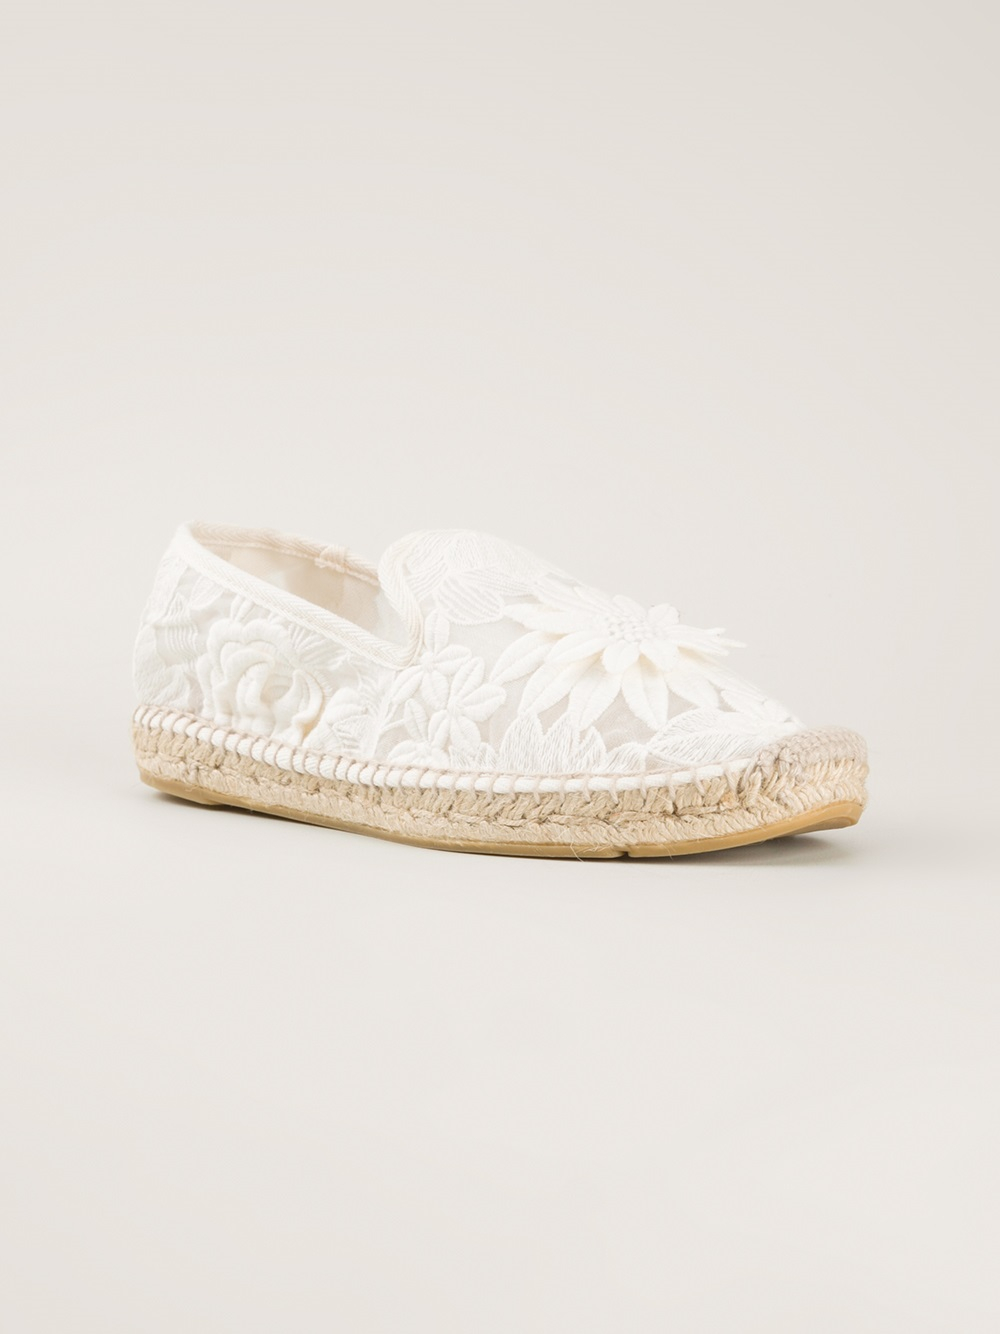 Lyst - Tory Burch Embroidered Espadrilles in White